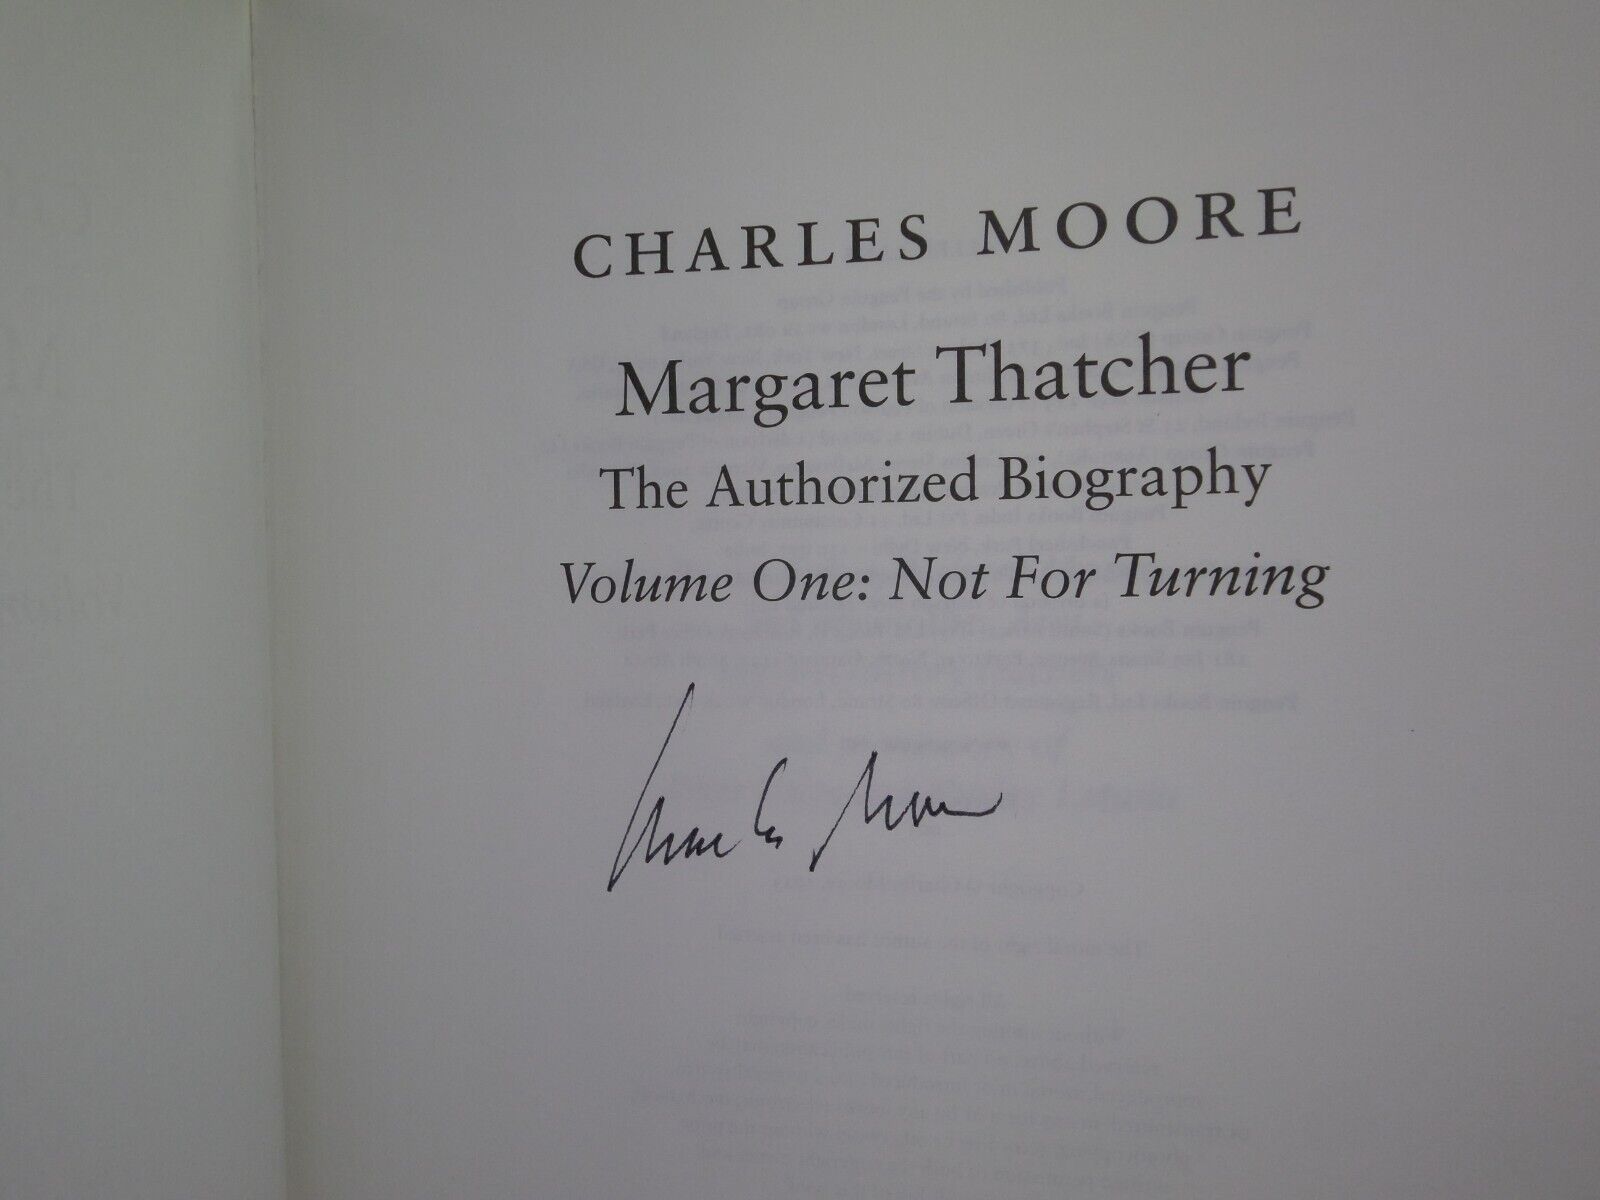 MARGARET THATCHER: THE AUTHORIZED BIOGRAPHY 2013 VOLUME ONE, SIGNED BY AUTHOR